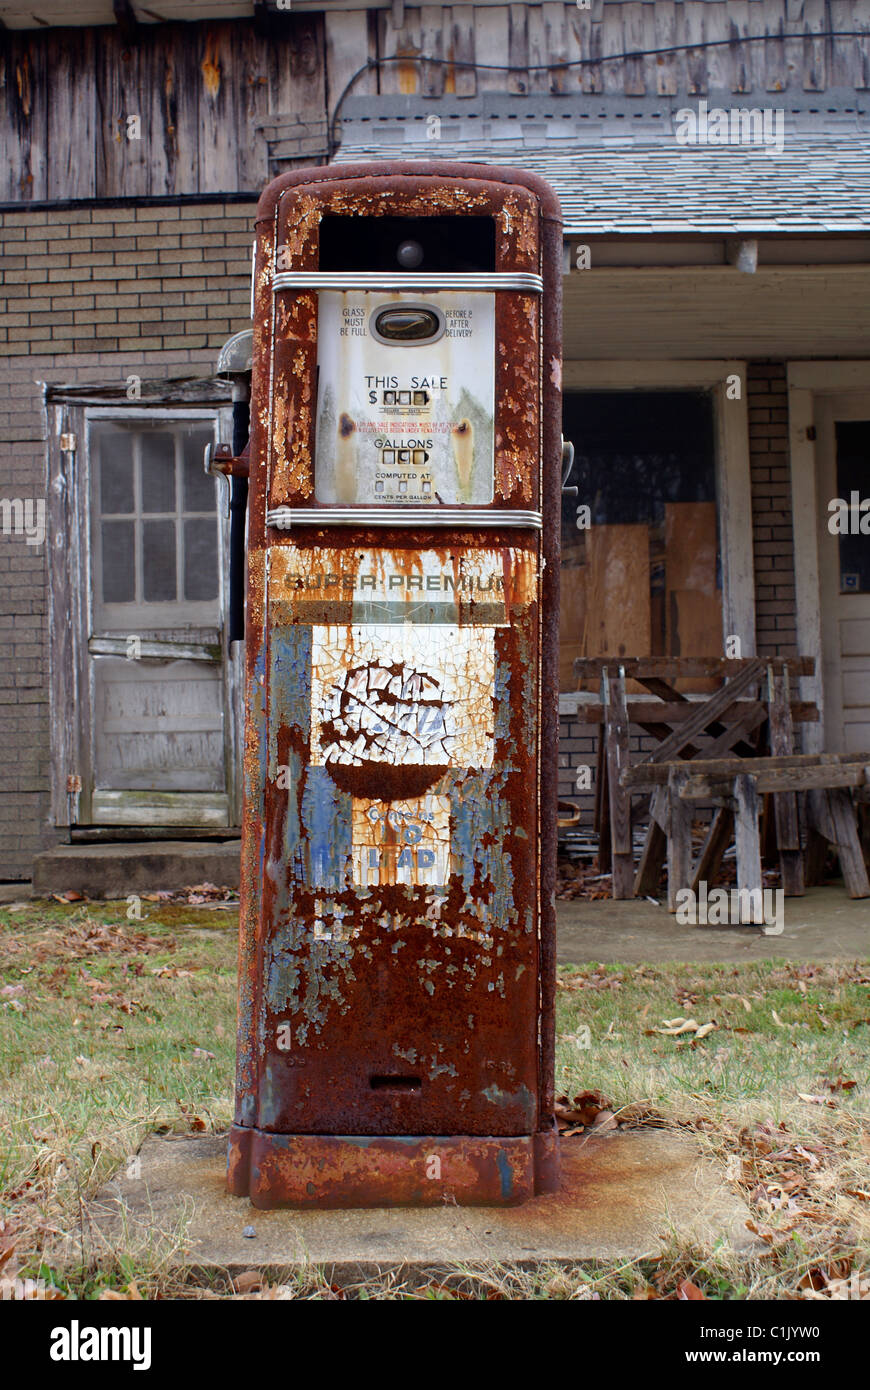 Antique American gas pump. Rusted and with chipped off paint in front of a old brick building. Logos & brand names are removed. Stock Photo